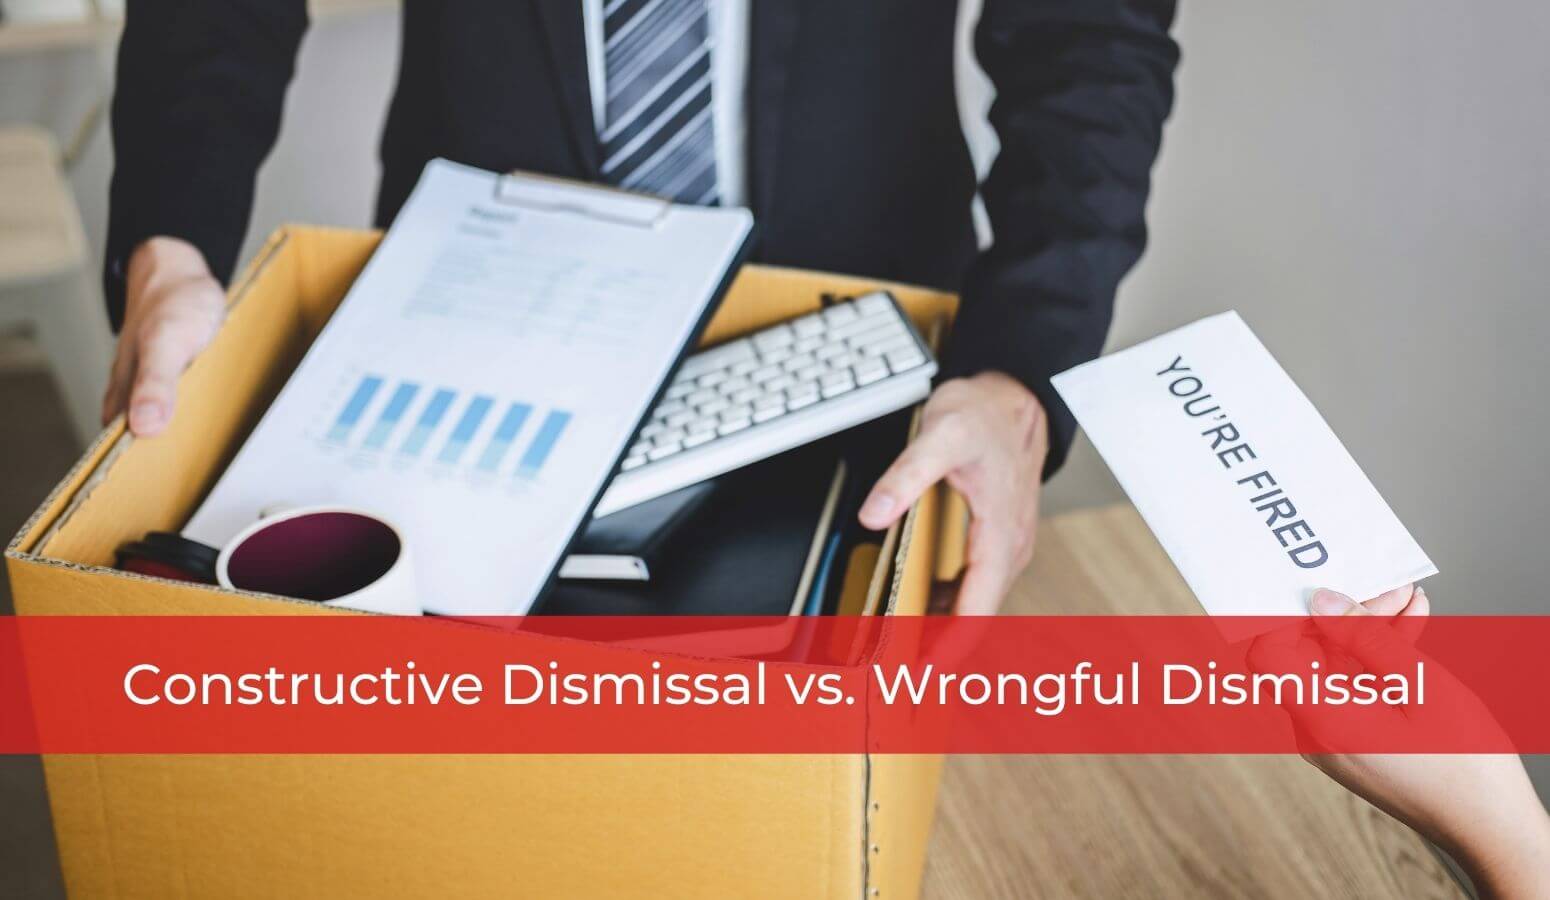 Featured image for “Constructive Dismissal vs. Wrongful Dismissal”